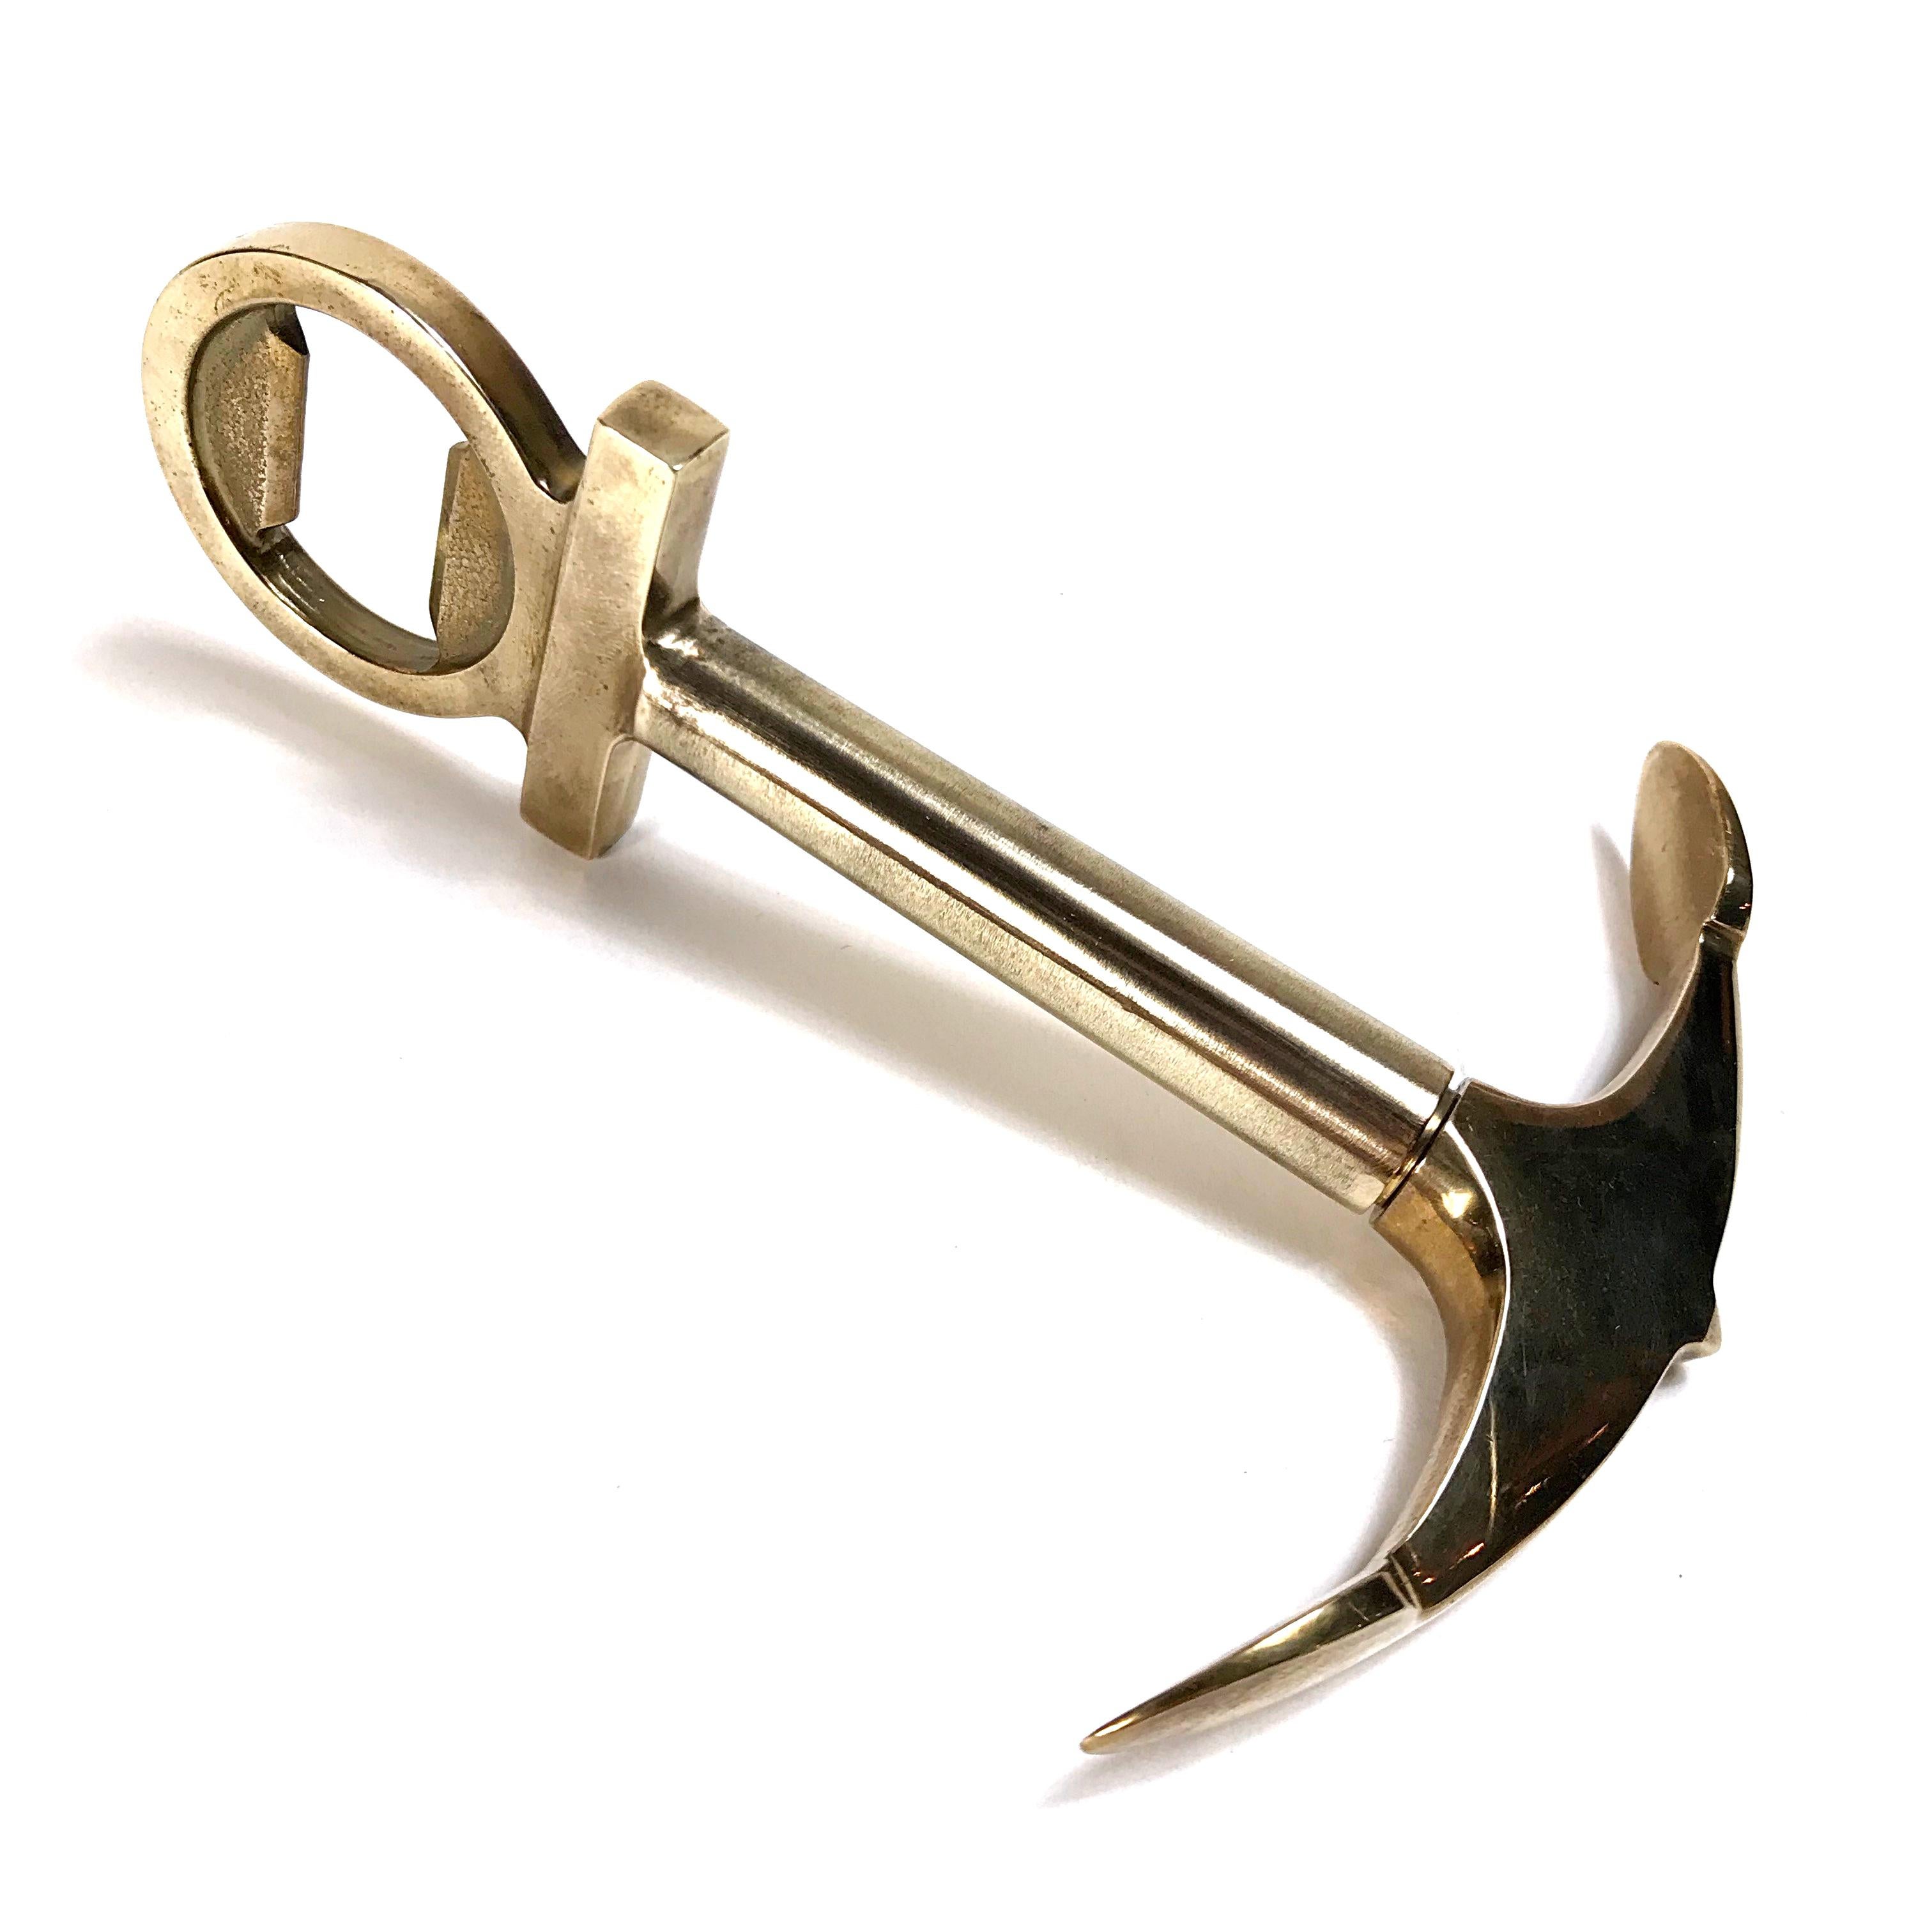 Polished Midcentury Auböck Style Solid Brass Anchor Wine Bottle Opener, 1950s, Germany